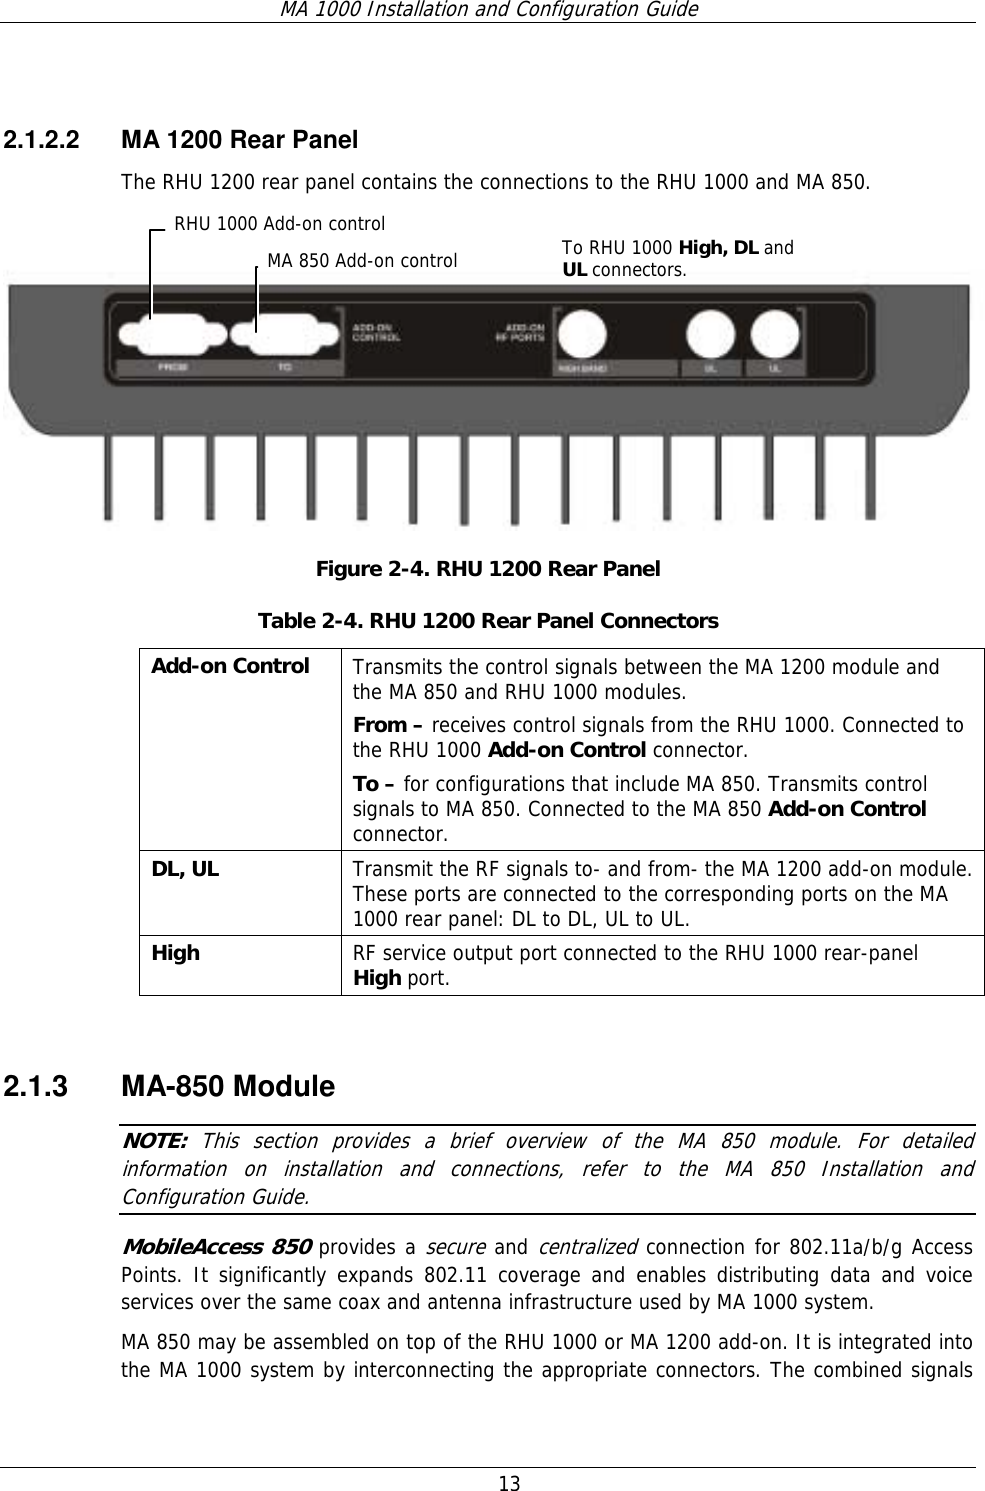 MA 1000 Installation and Configuration Guide  13  2.1.2.2  MA 1200 Rear Panel The RHU 1200 rear panel contains the connections to the RHU 1000 and MA 850.    Figure  2-4. RHU 1200 Rear Panel Table  2-4. RHU 1200 Rear Panel Connectors Add-on Control   Transmits the control signals between the MA 1200 module and the MA 850 and RHU 1000 modules.  From – receives control signals from the RHU 1000. Connected to the RHU 1000 Add-on Control connector. To – for configurations that include MA 850. Transmits control signals to MA 850. Connected to the MA 850 Add-on Control connector. DL, UL  Transmit the RF signals to- and from- the MA 1200 add-on module. These ports are connected to the corresponding ports on the MA 1000 rear panel: DL to DL, UL to UL. High  RF service output port connected to the RHU 1000 rear-panel High port.  2.1.3 MA-850 Module NOTE:  This section provides a brief overview of the MA 850 module. For detailed information on installation and connections, refer to the MA 850 Installation and Configuration Guide. MobileAccess 850 provides a secure and centralized connection for 802.11a/b/g Access Points. It significantly expands 802.11 coverage and enables distributing data and voice services over the same coax and antenna infrastructure used by MA 1000 system.  MA 850 may be assembled on top of the RHU 1000 or MA 1200 add-on. It is integrated into the MA 1000 system by interconnecting the appropriate connectors. The combined signals RHU 1000 Add-on controlMA 850 Add-on control To RHU 1000 High, DL and UL connectors. 